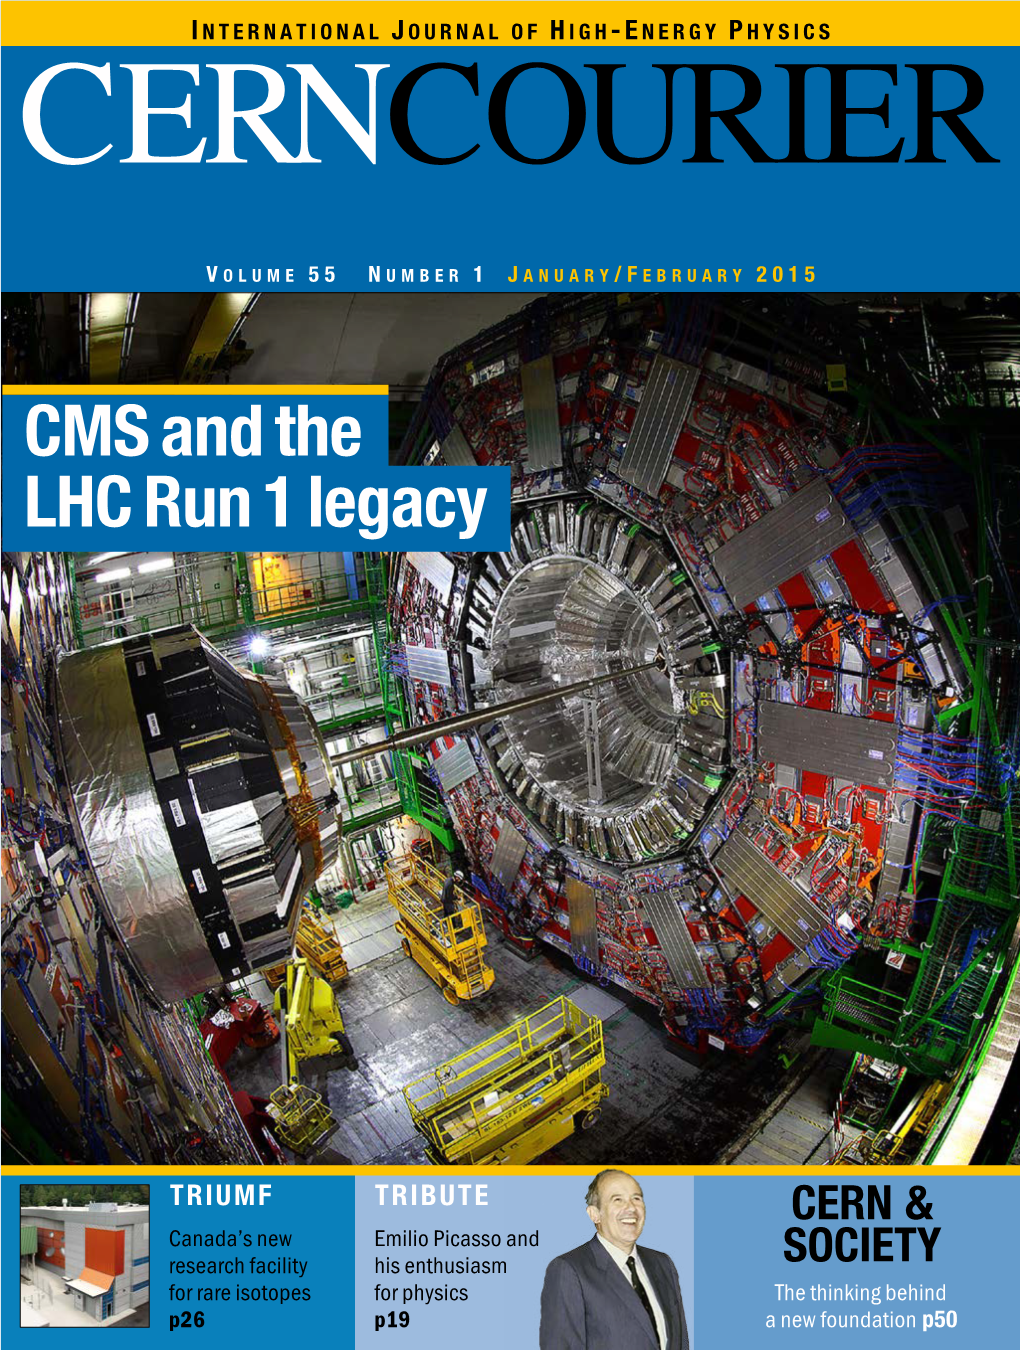 CMS and the LHC Run 1 Legacy